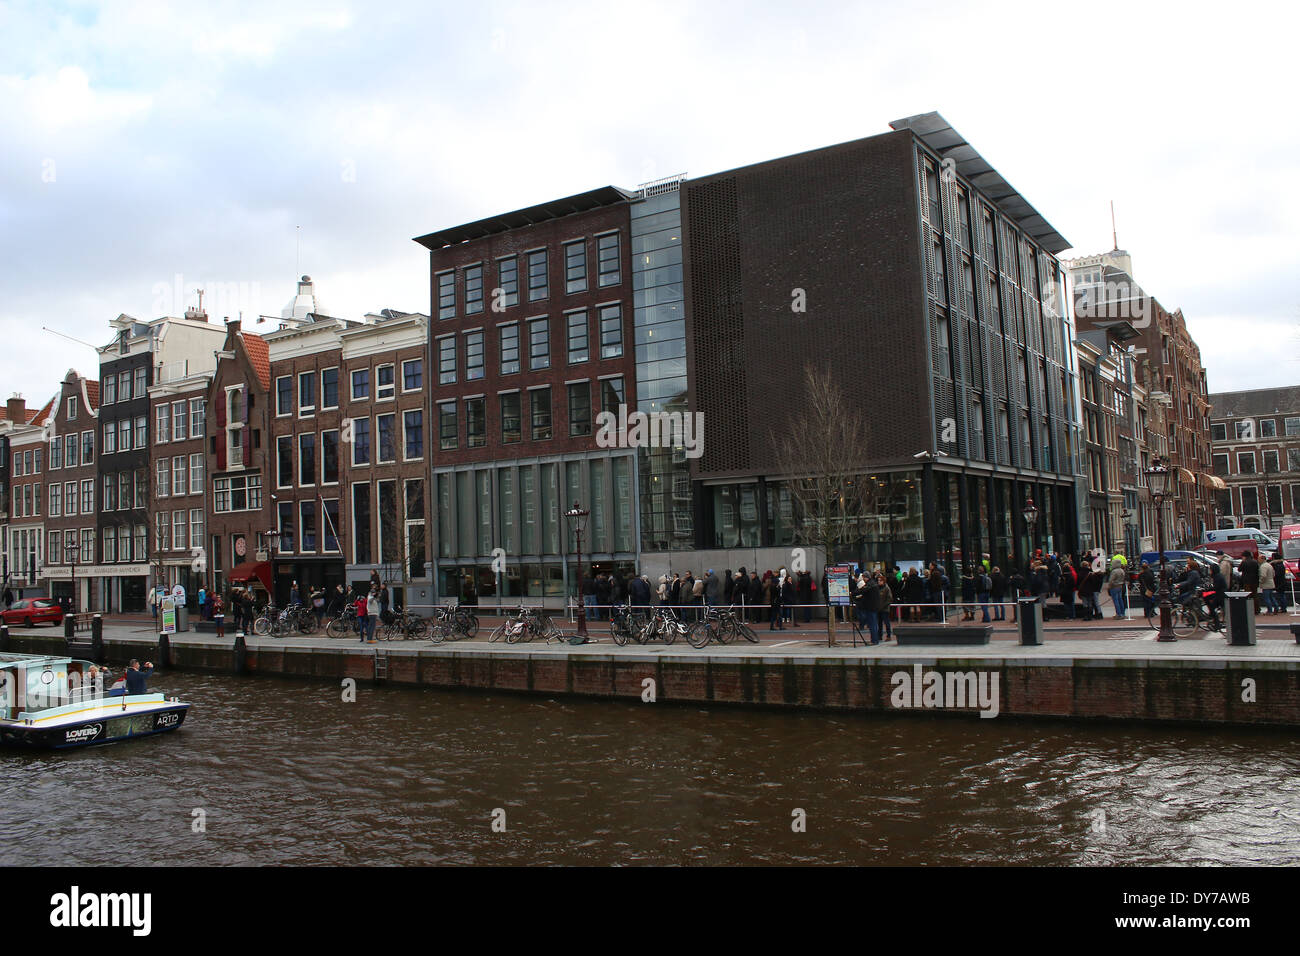 People standing in line in front of the Anne Frank House Museum (Achterhuis/Secret Annex) at  Prinsengracht canal, Amsterdam Stock Photo